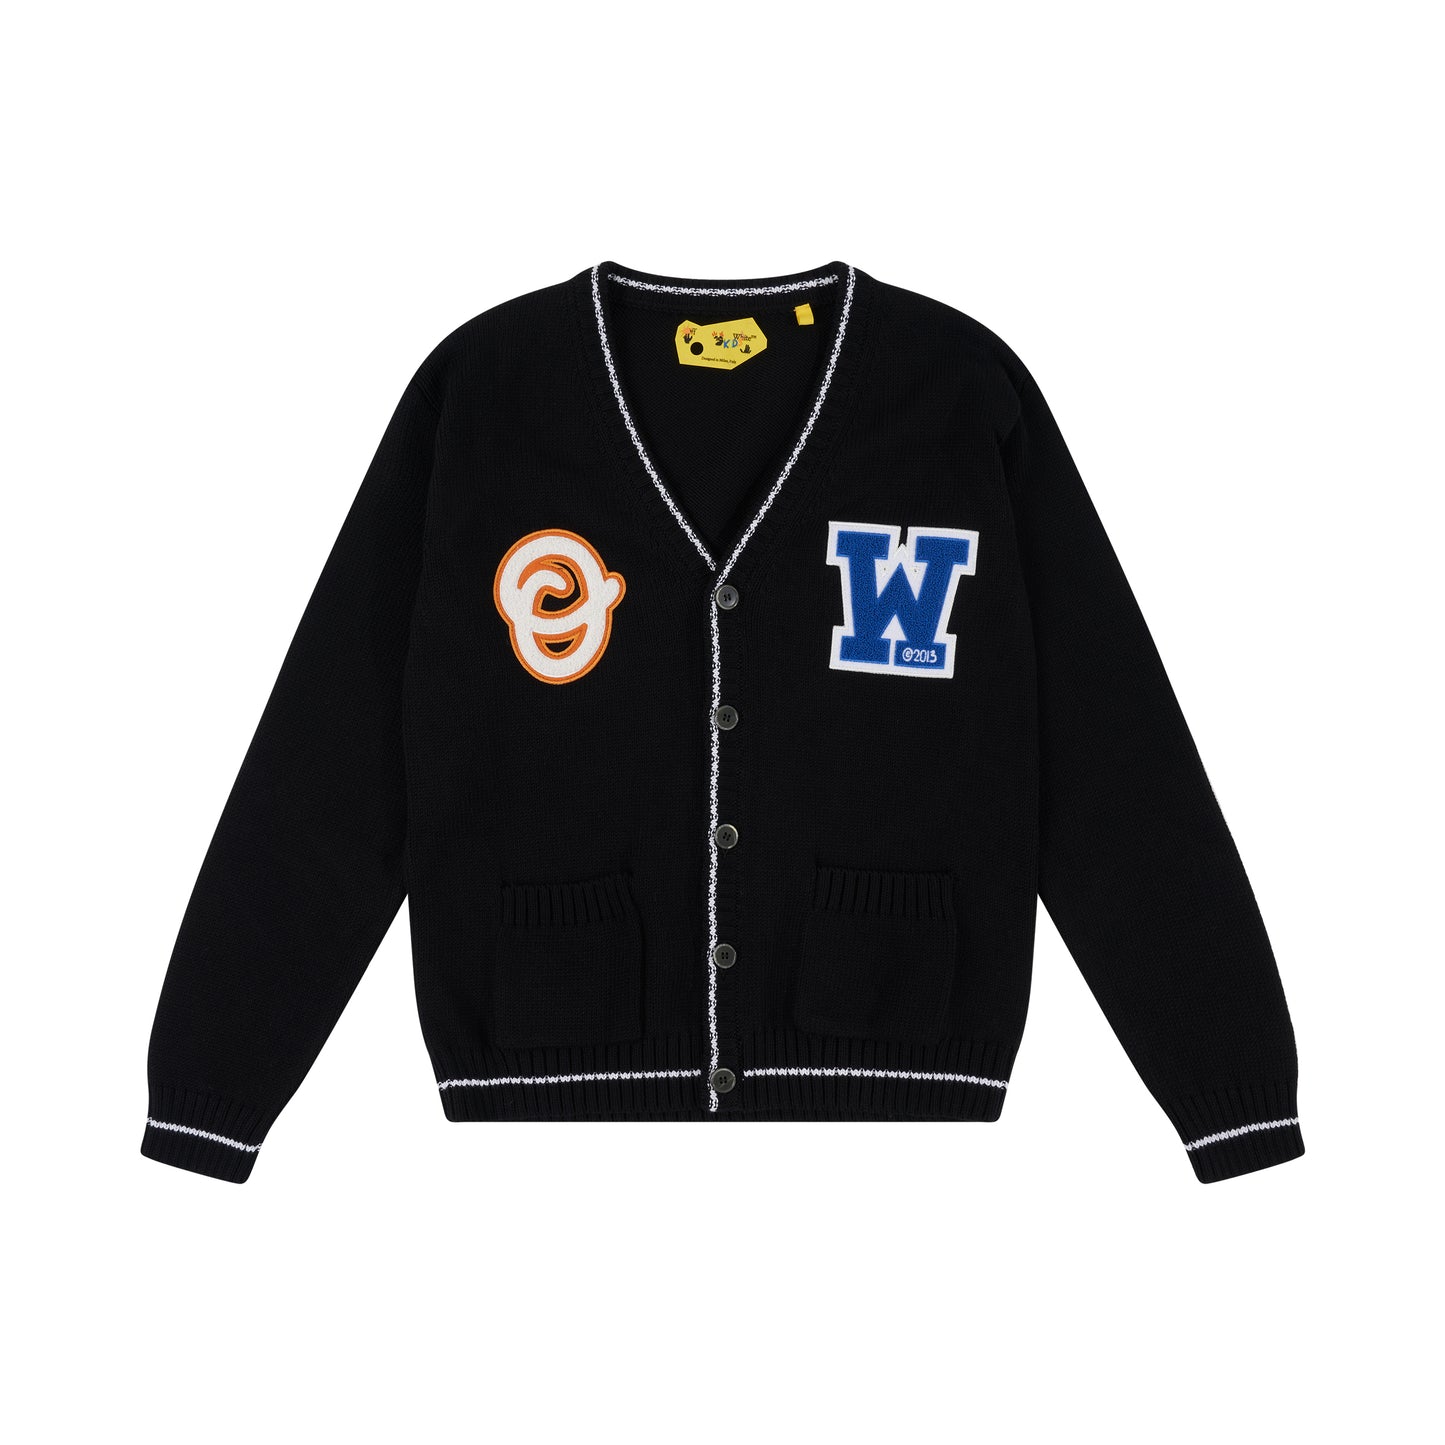 Off White Patch Knit Cardigan in Black/Blue